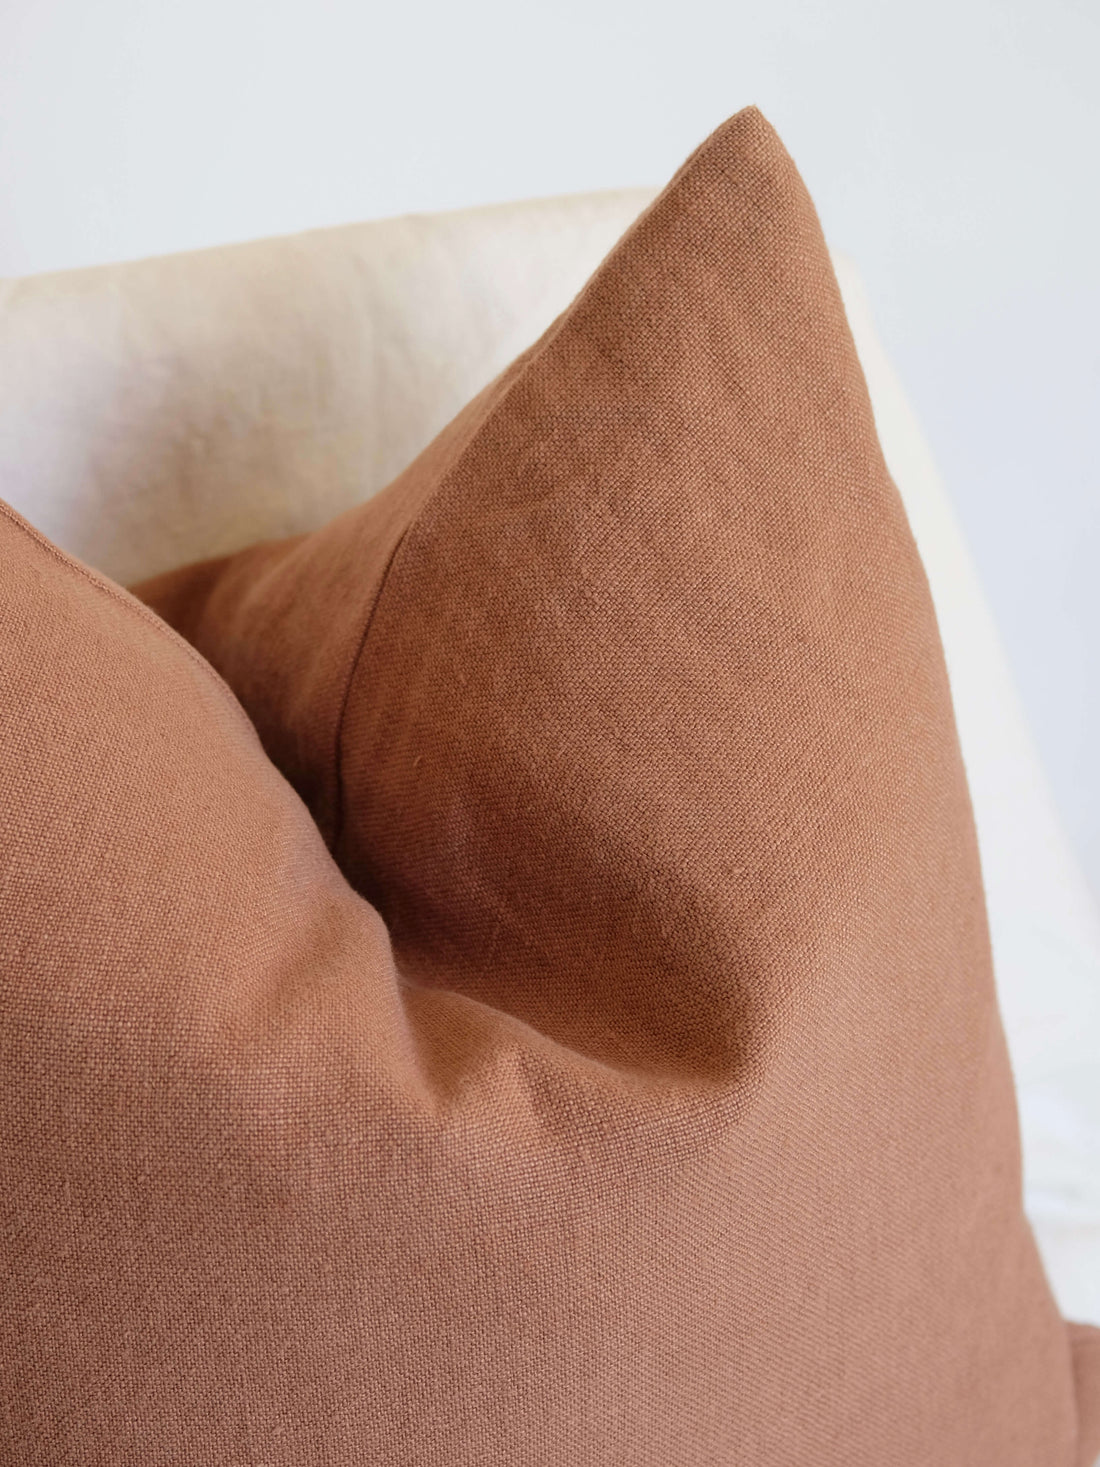 Linen Pillow in Cinnamon by Libeco